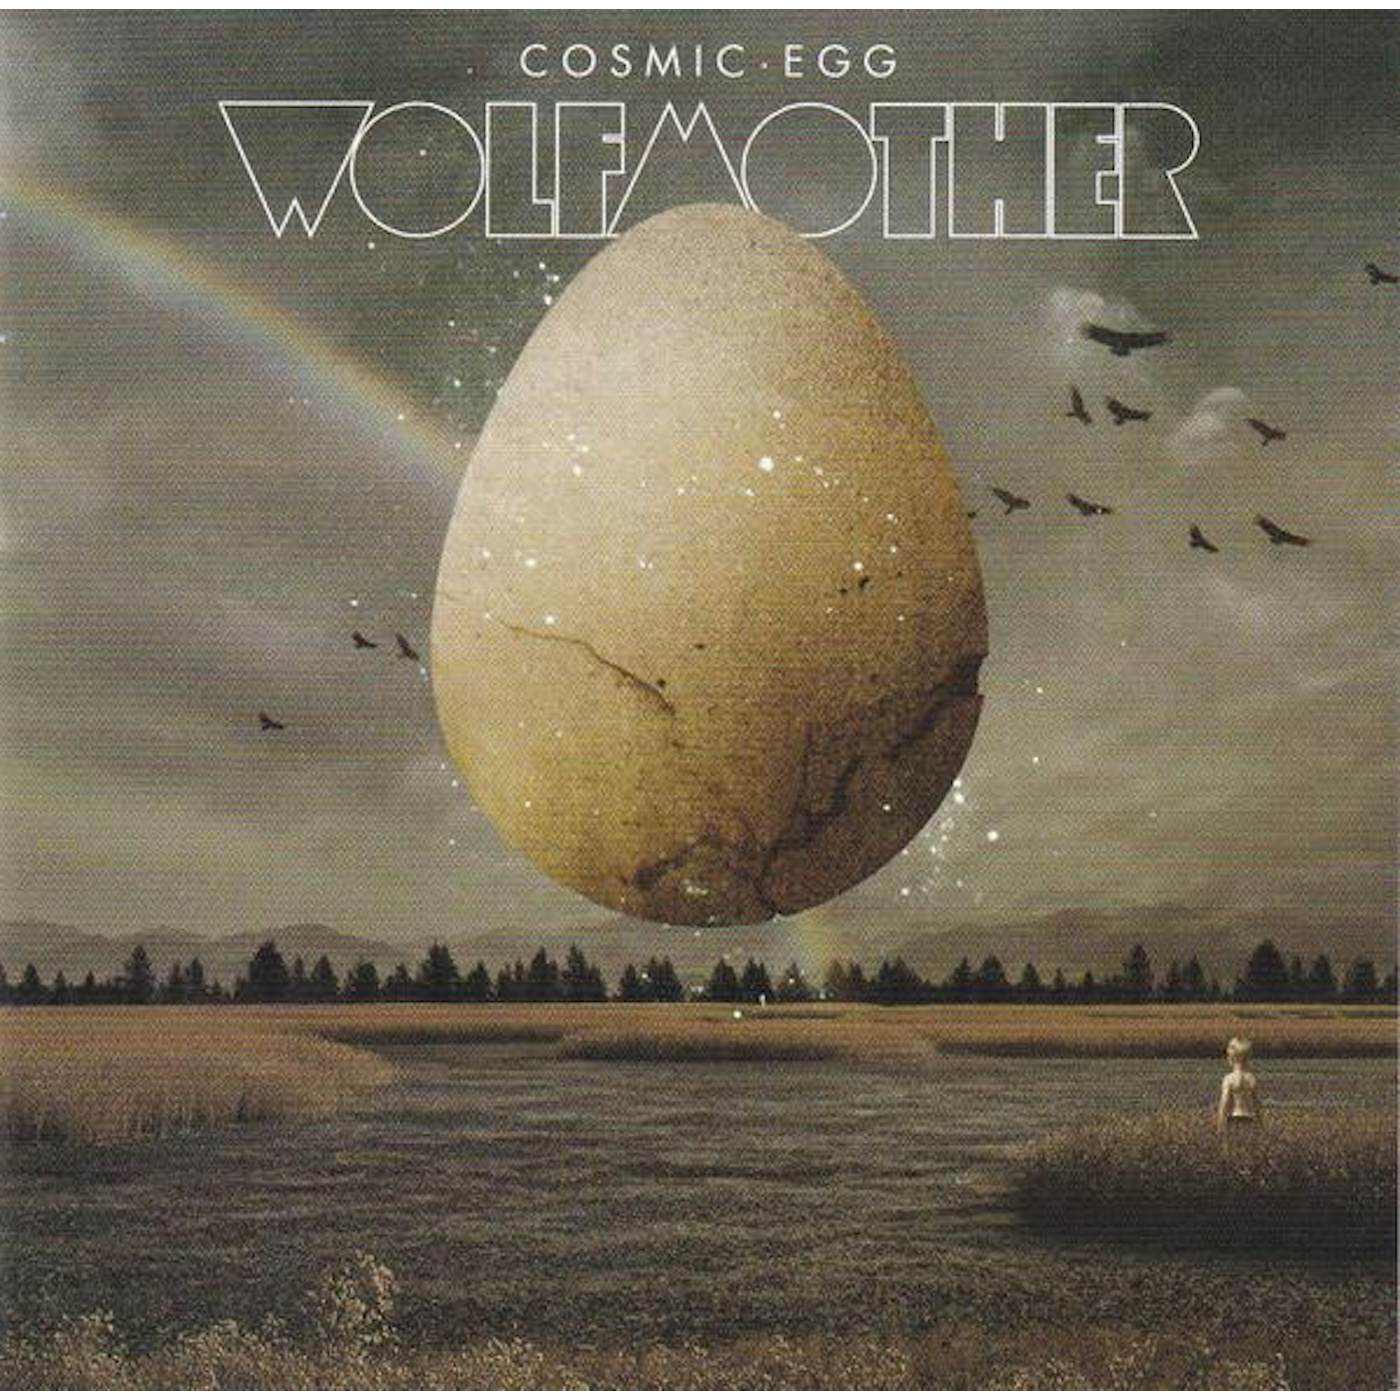 Wolfmother COSMIC EGG CD